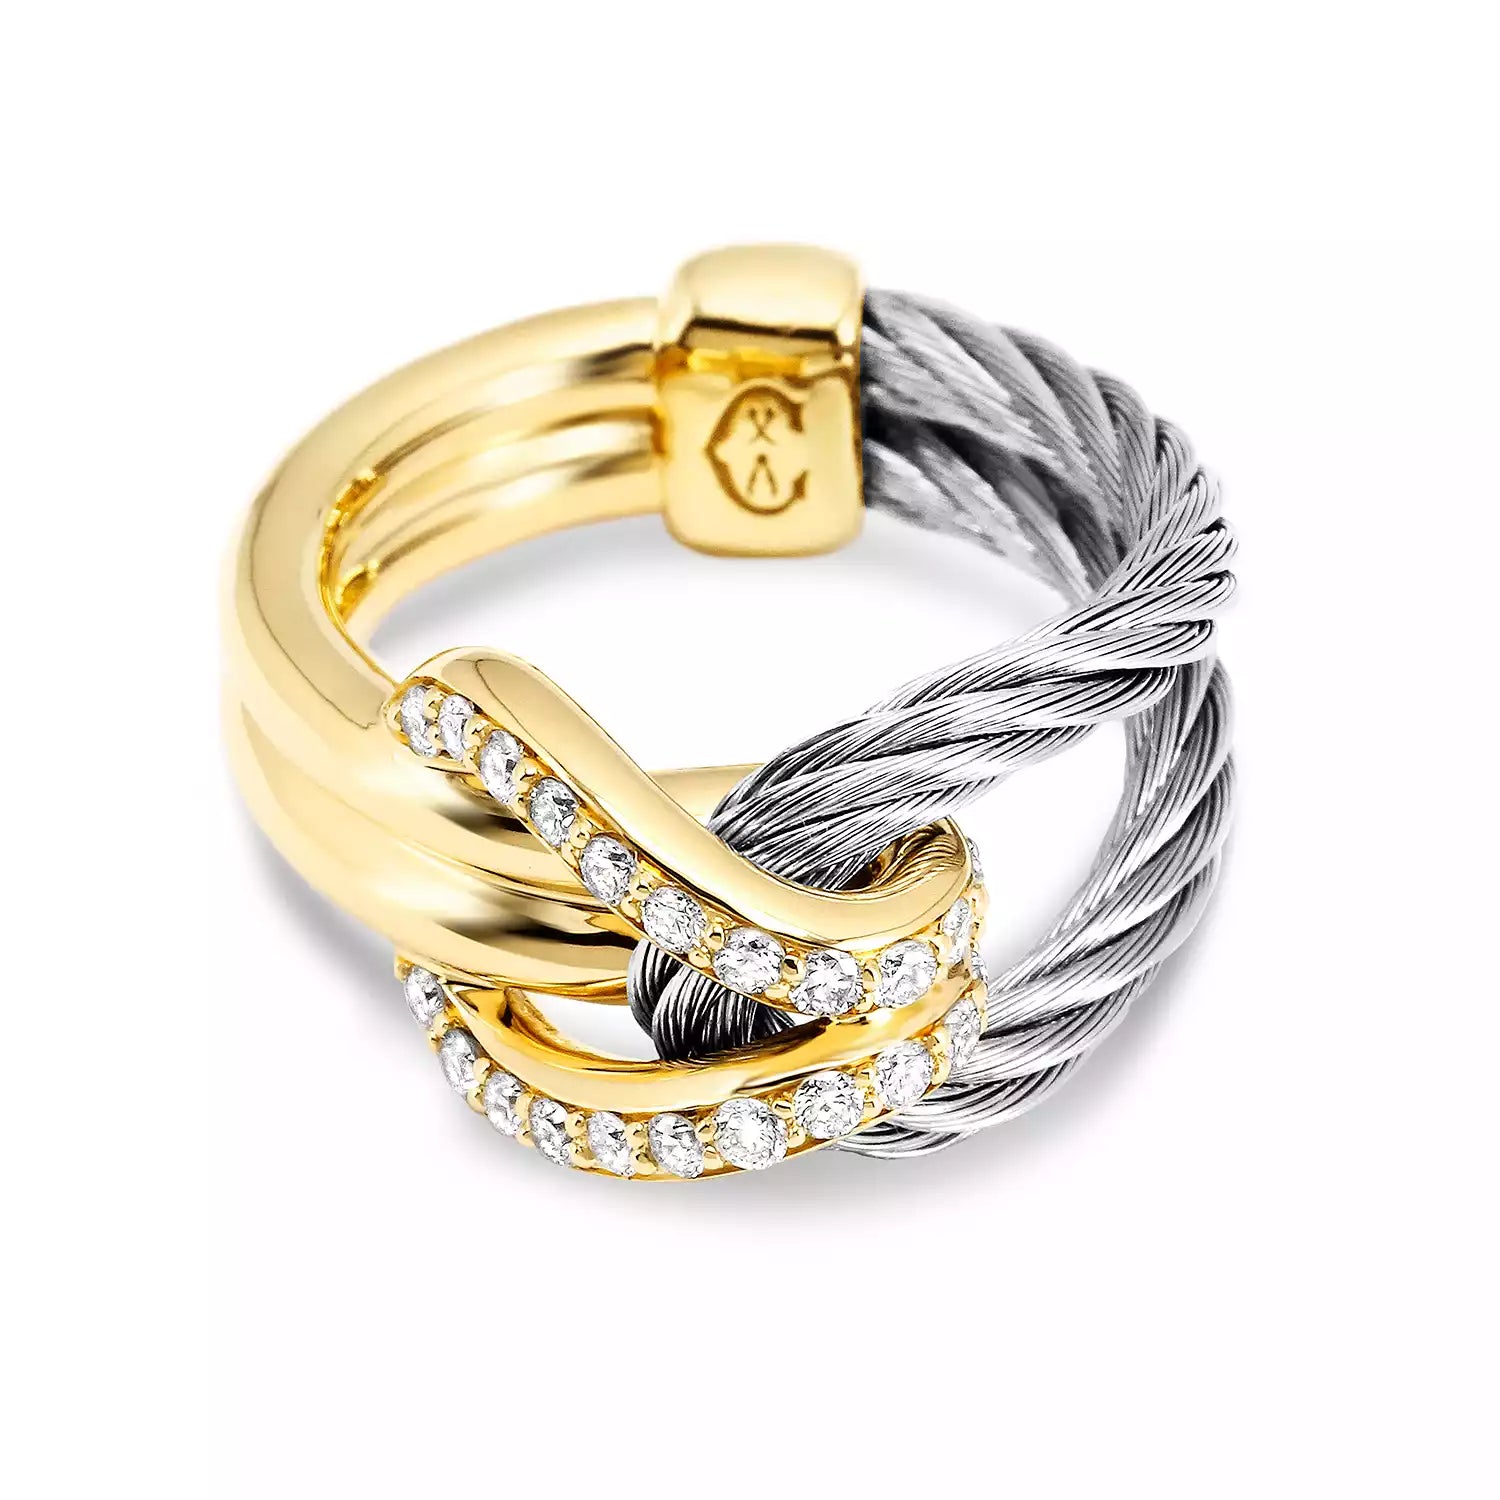 Steel_Gold 18KT with 22 Diamonds 0.33ct